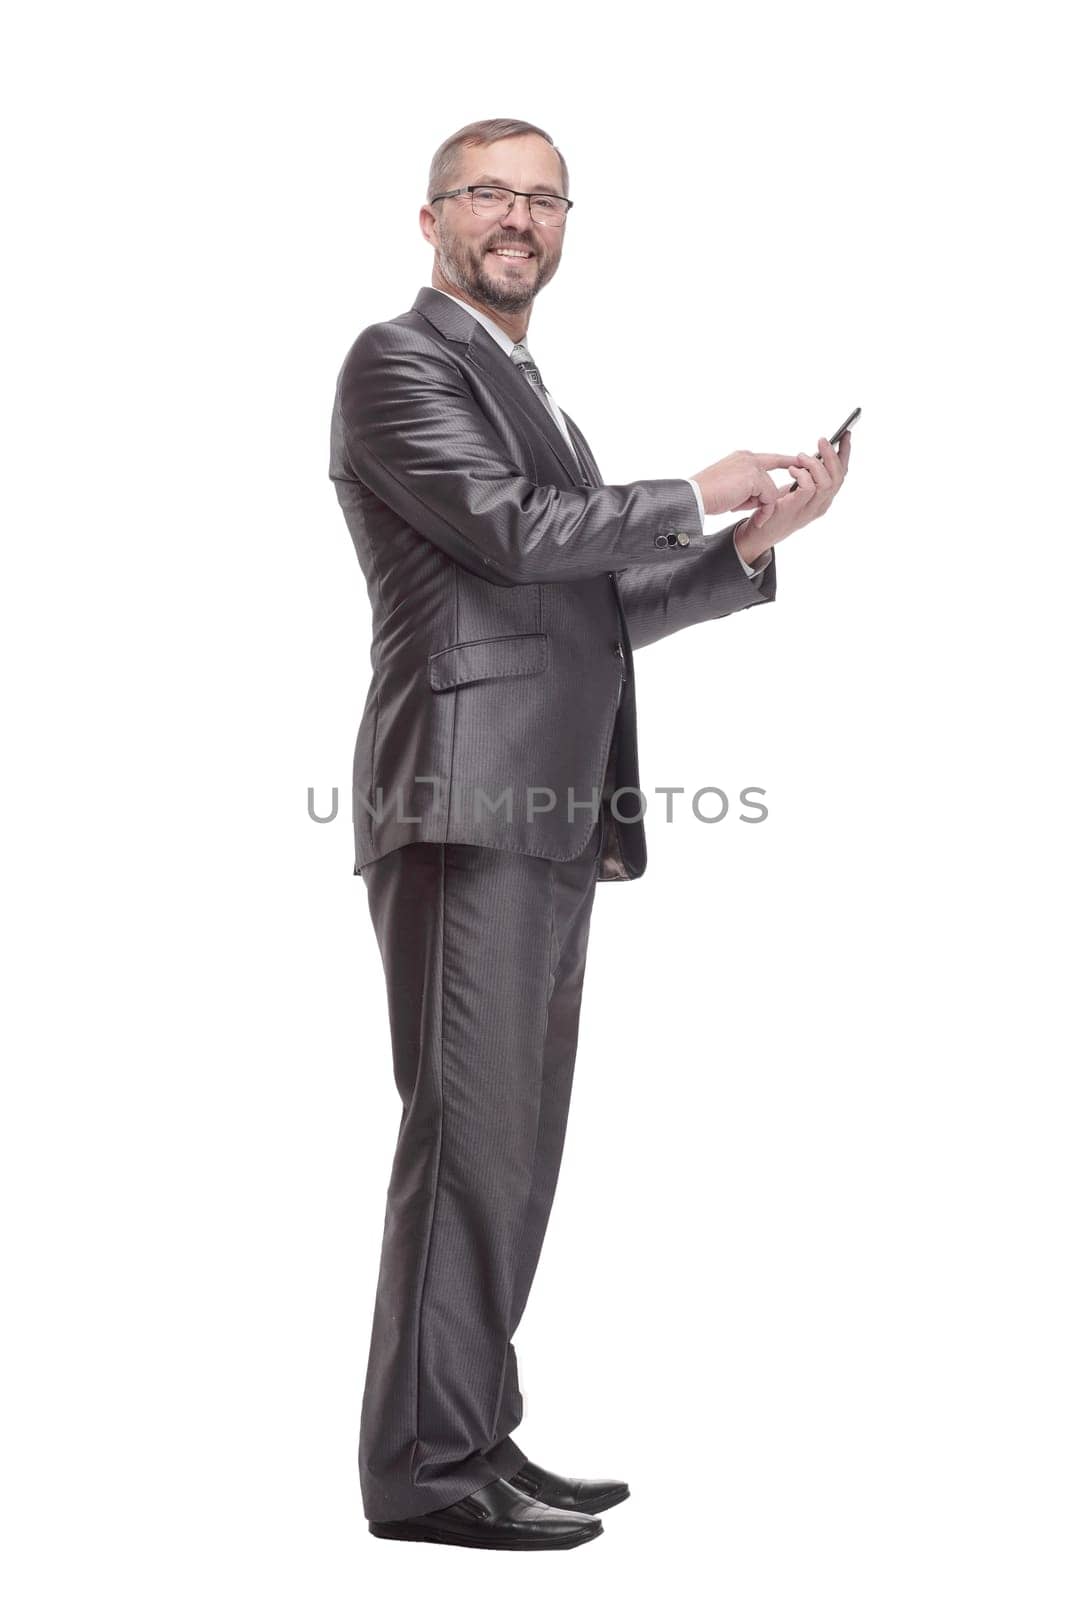 Executive business man with a smartphone. isolated on a white background. by asdf